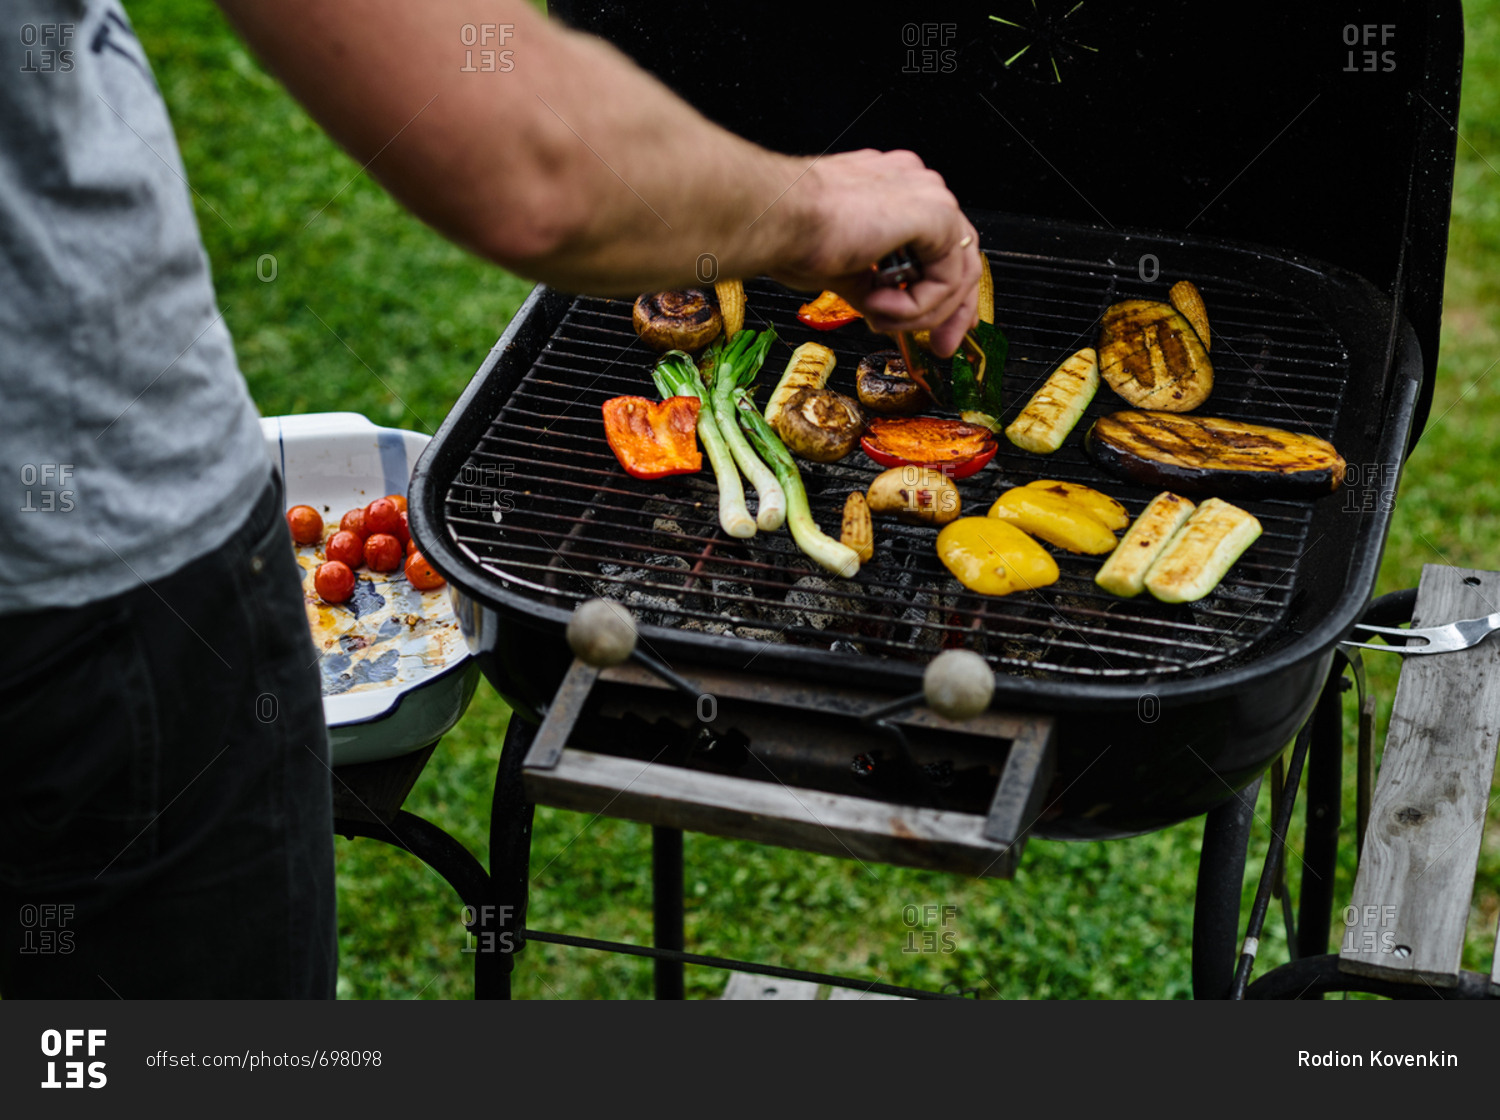 View from behind of man's arm using tongs to turn vegetables on the grill